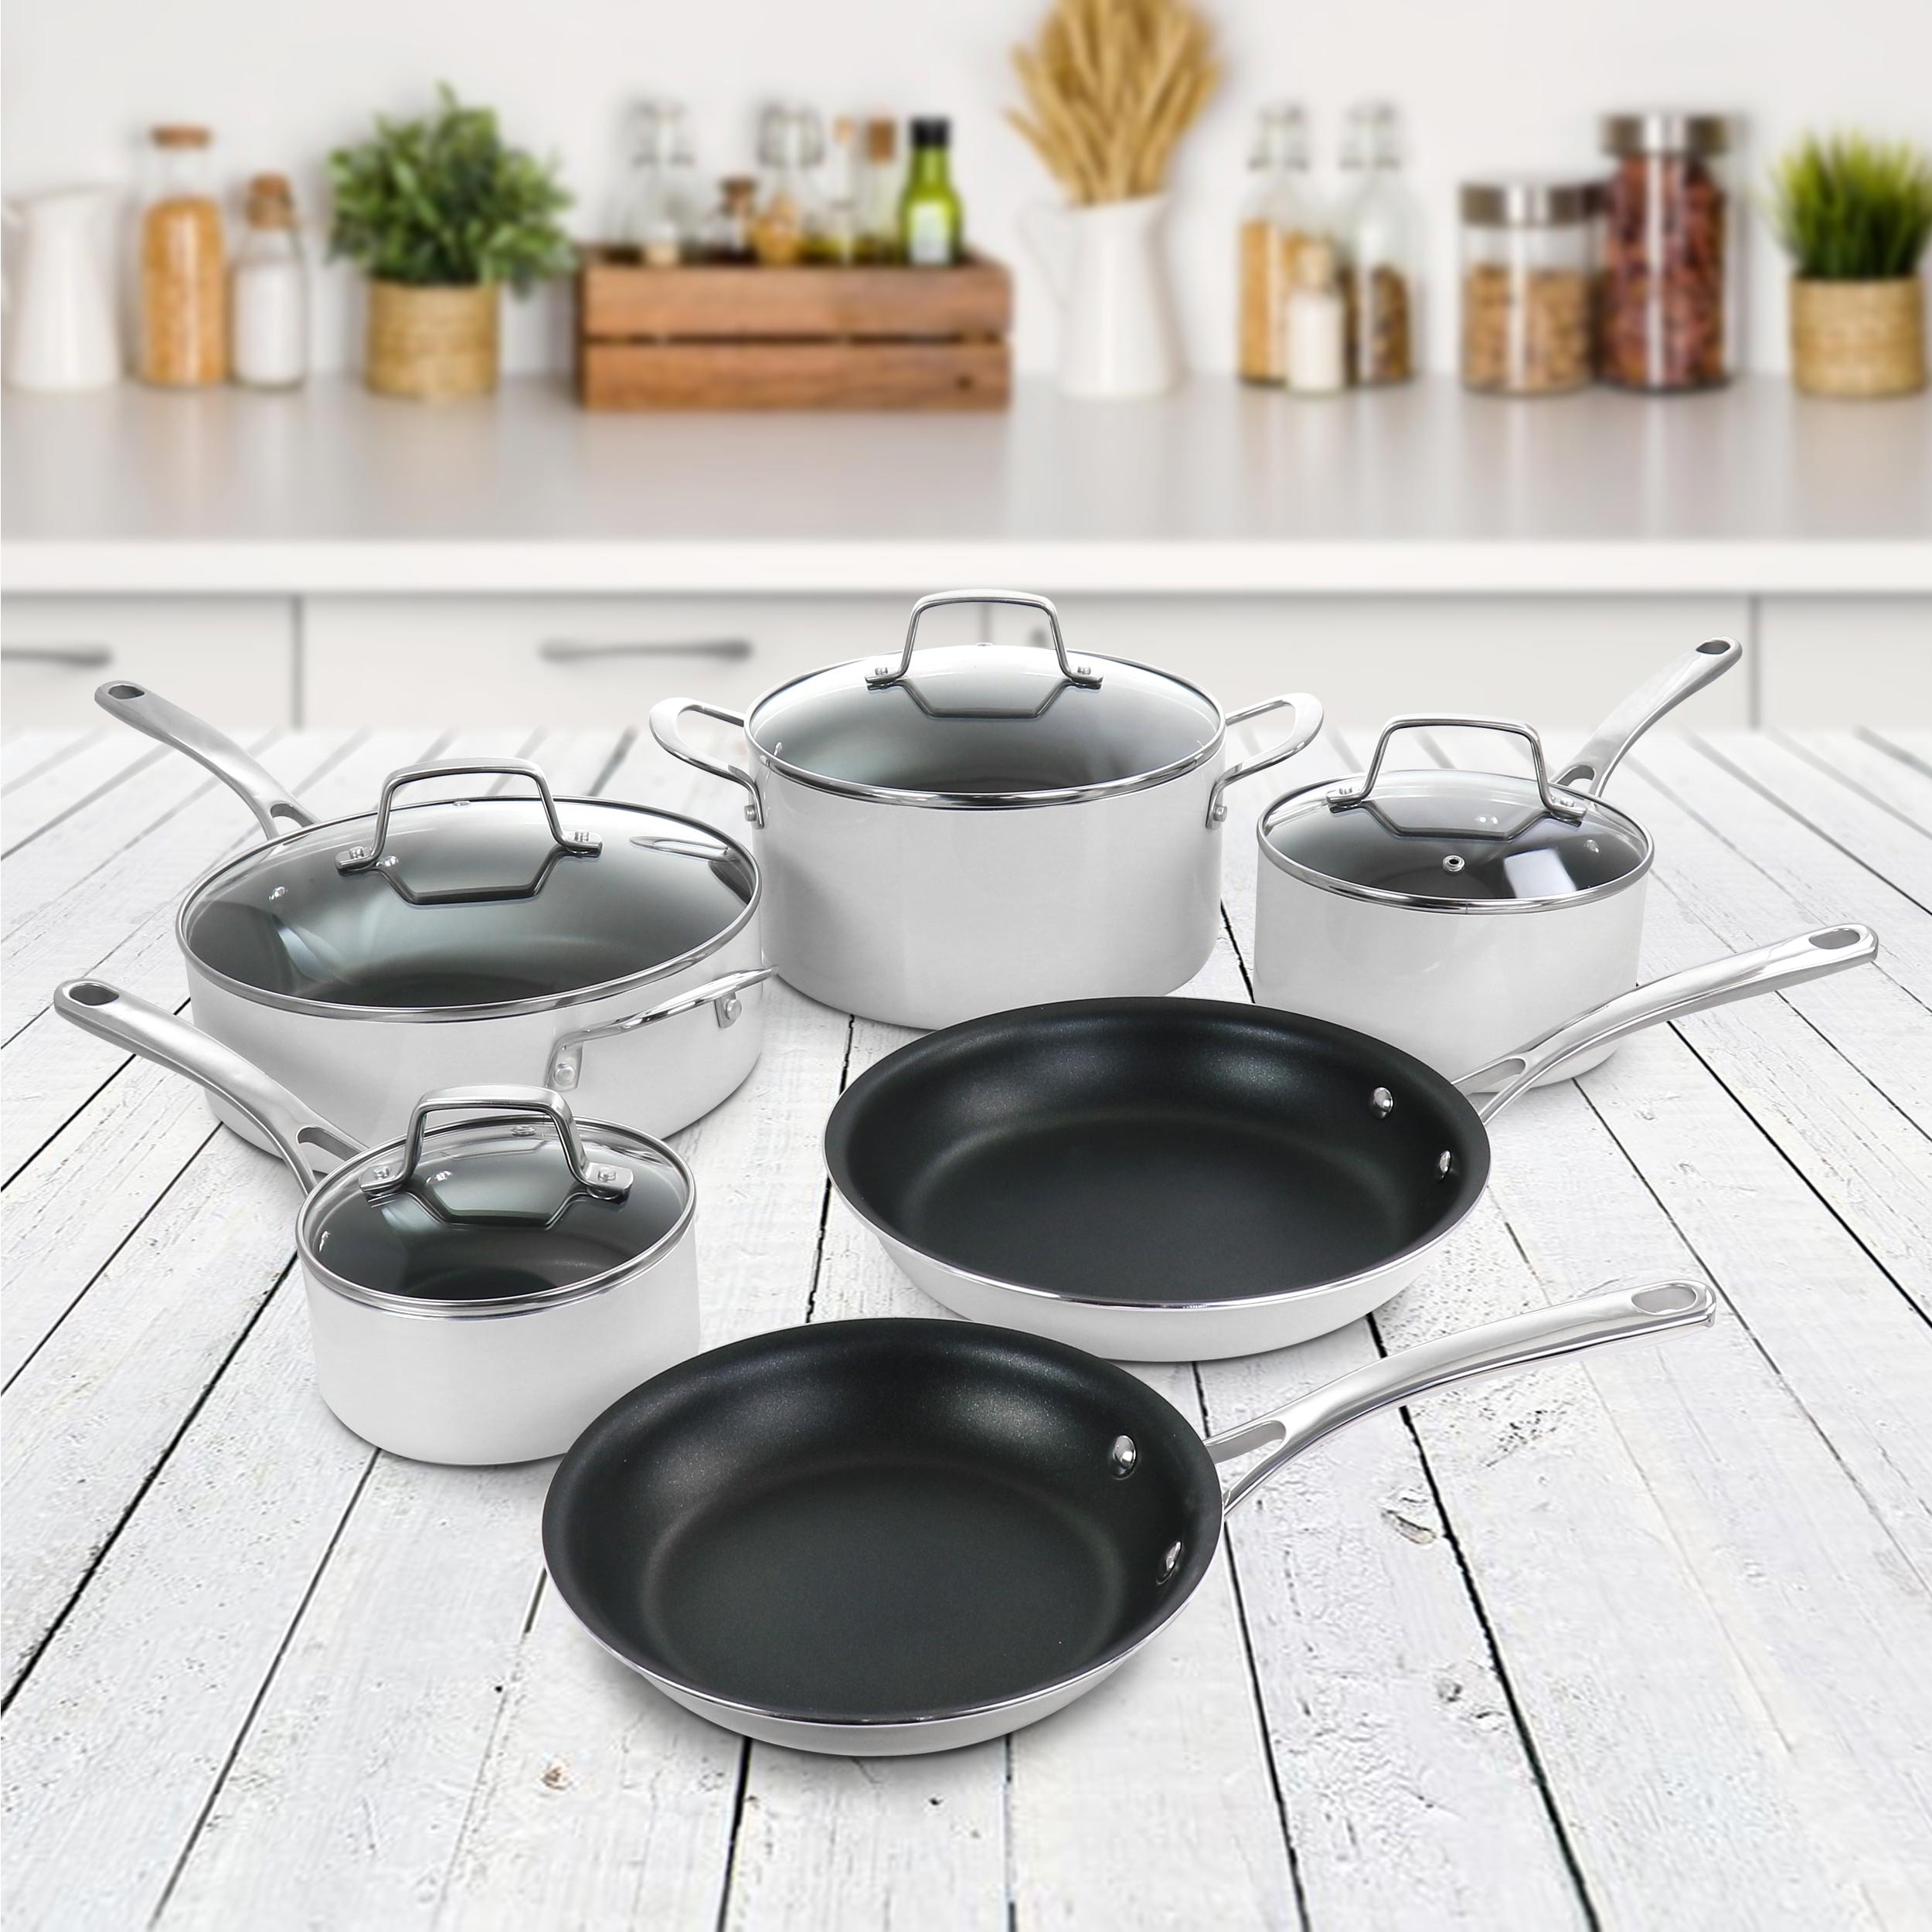 https://ak1.ostkcdn.com/images/products/is/images/direct/6aeb1818248ca337a5f29d80dcf824781403d2ef/Martha-Stewart-10-Piece-Aluminum-nonstick-Cookware-Set-in-White.jpg